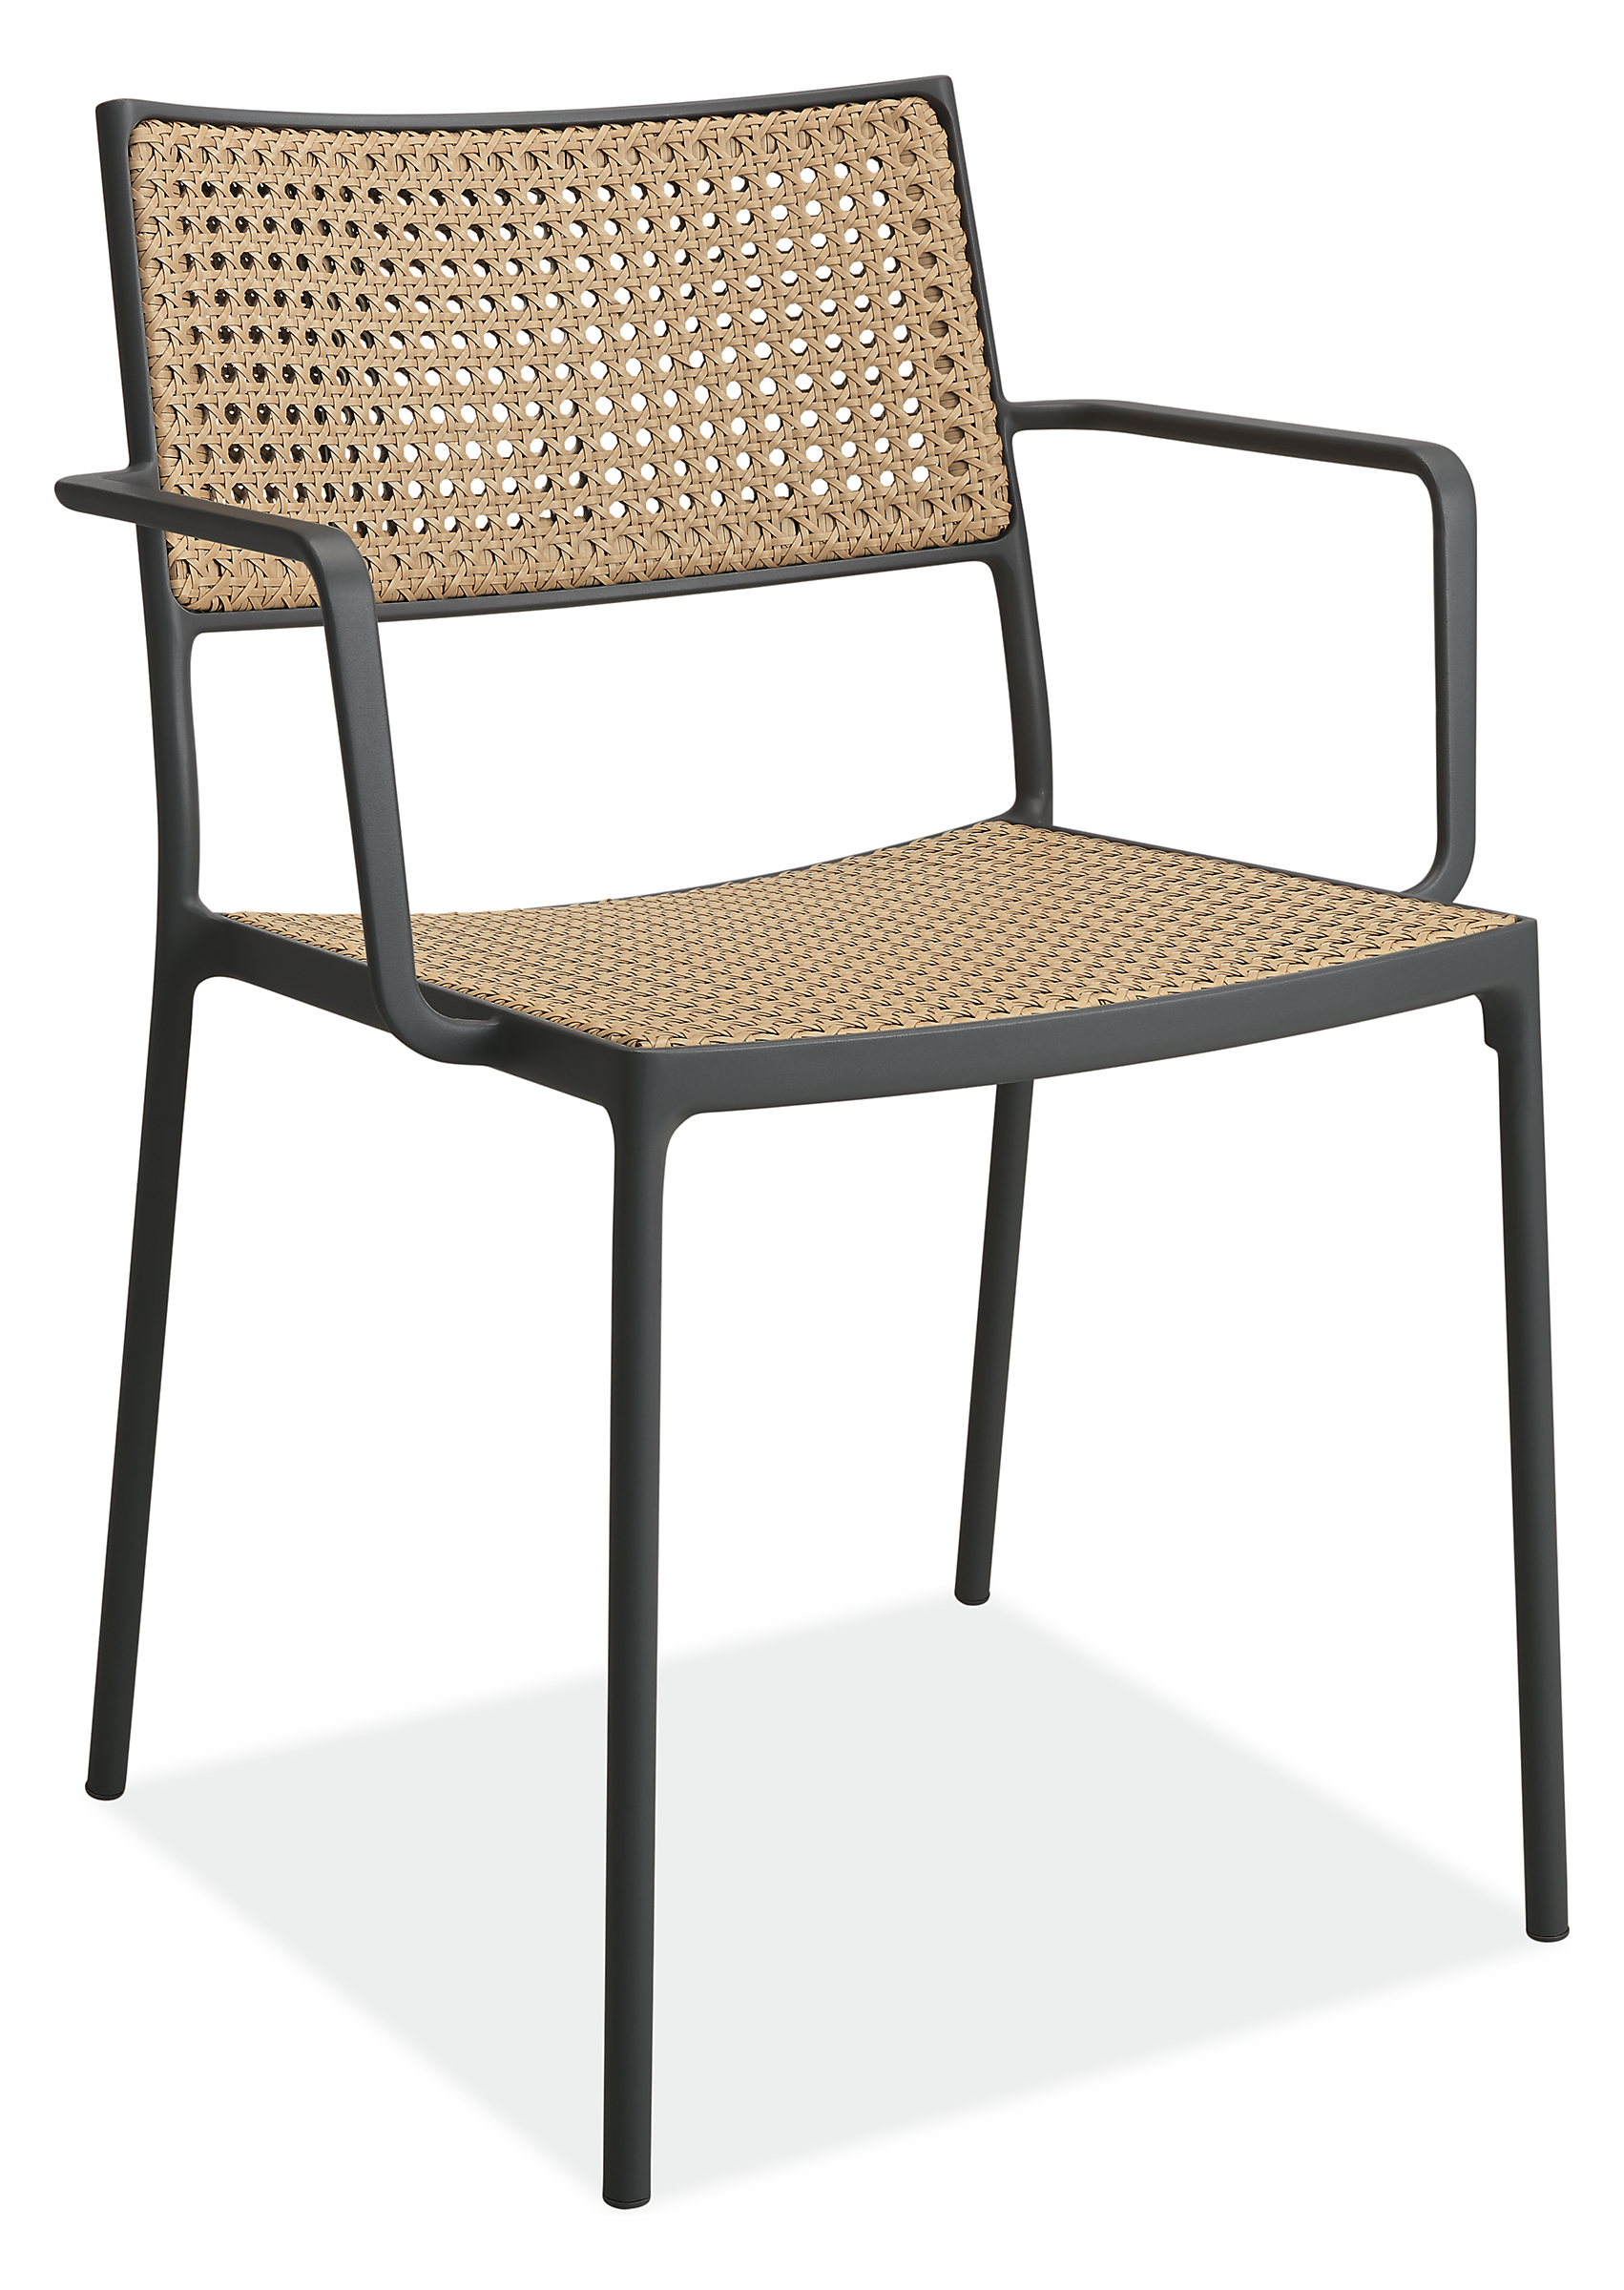 Plat Chair in Woven Cane